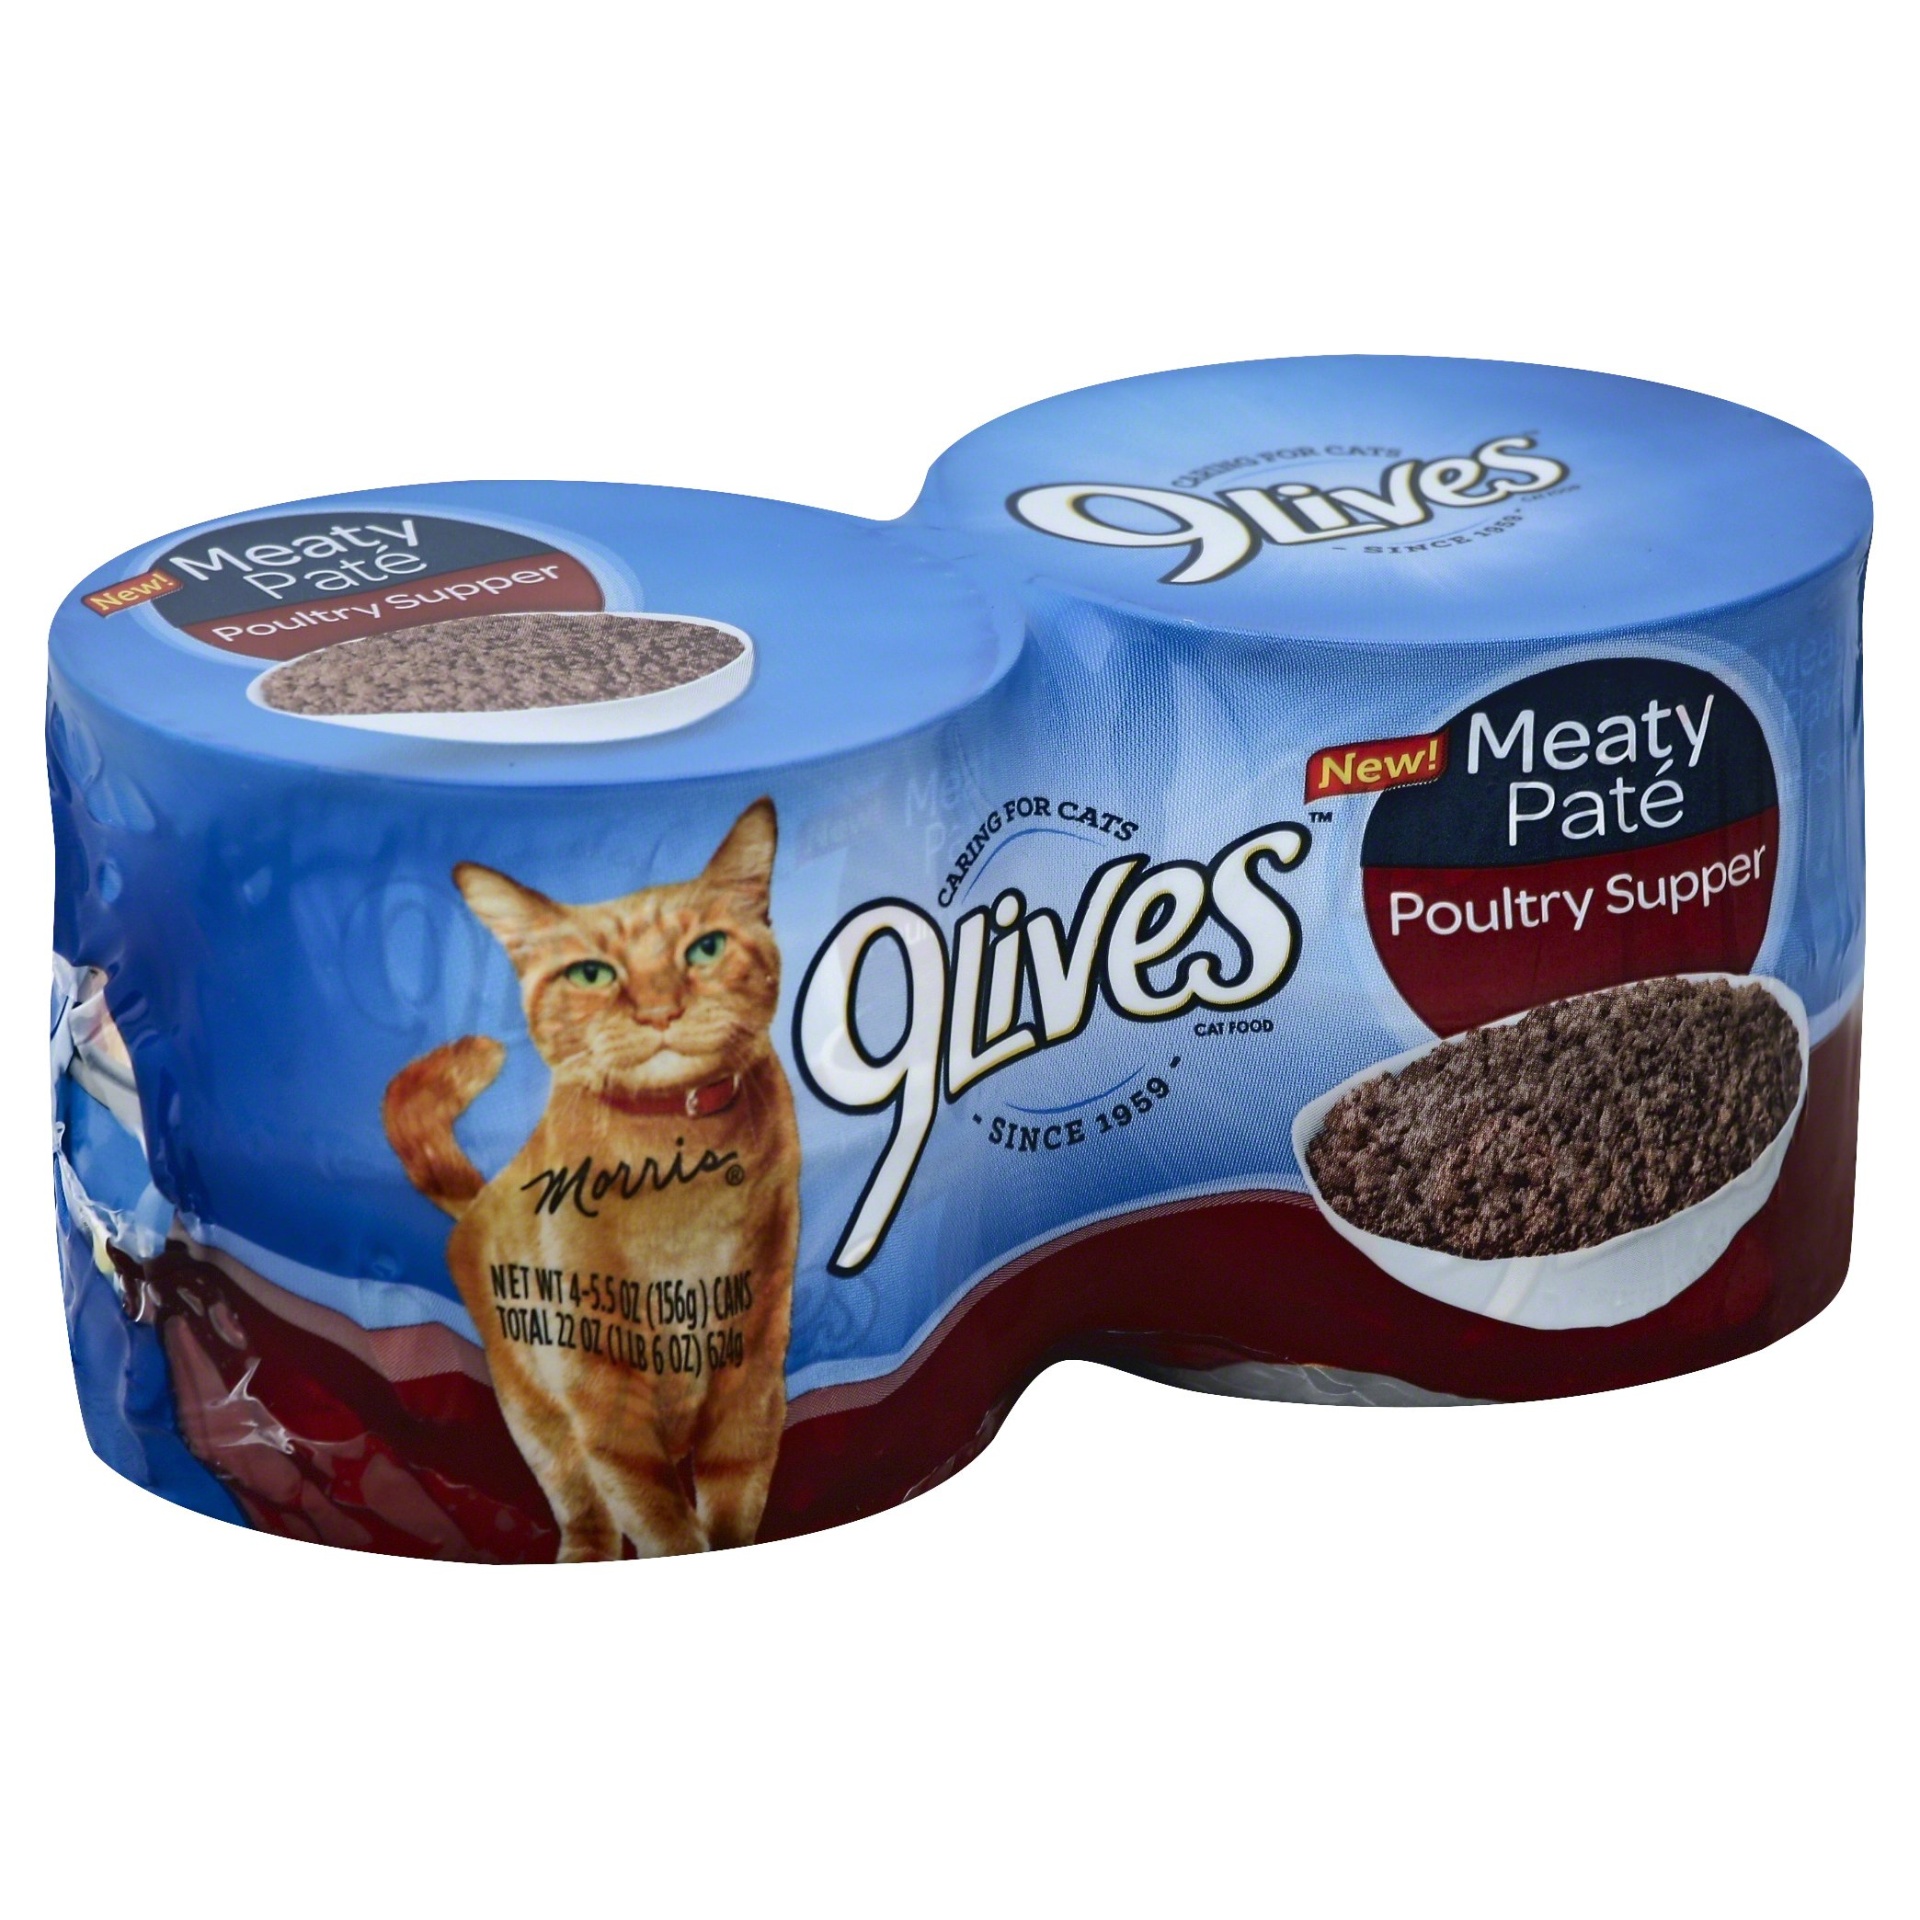 slide 1 of 1, 9Lives Wet Meaty Pate Poultry Supper, 4 ct; 5.5 oz